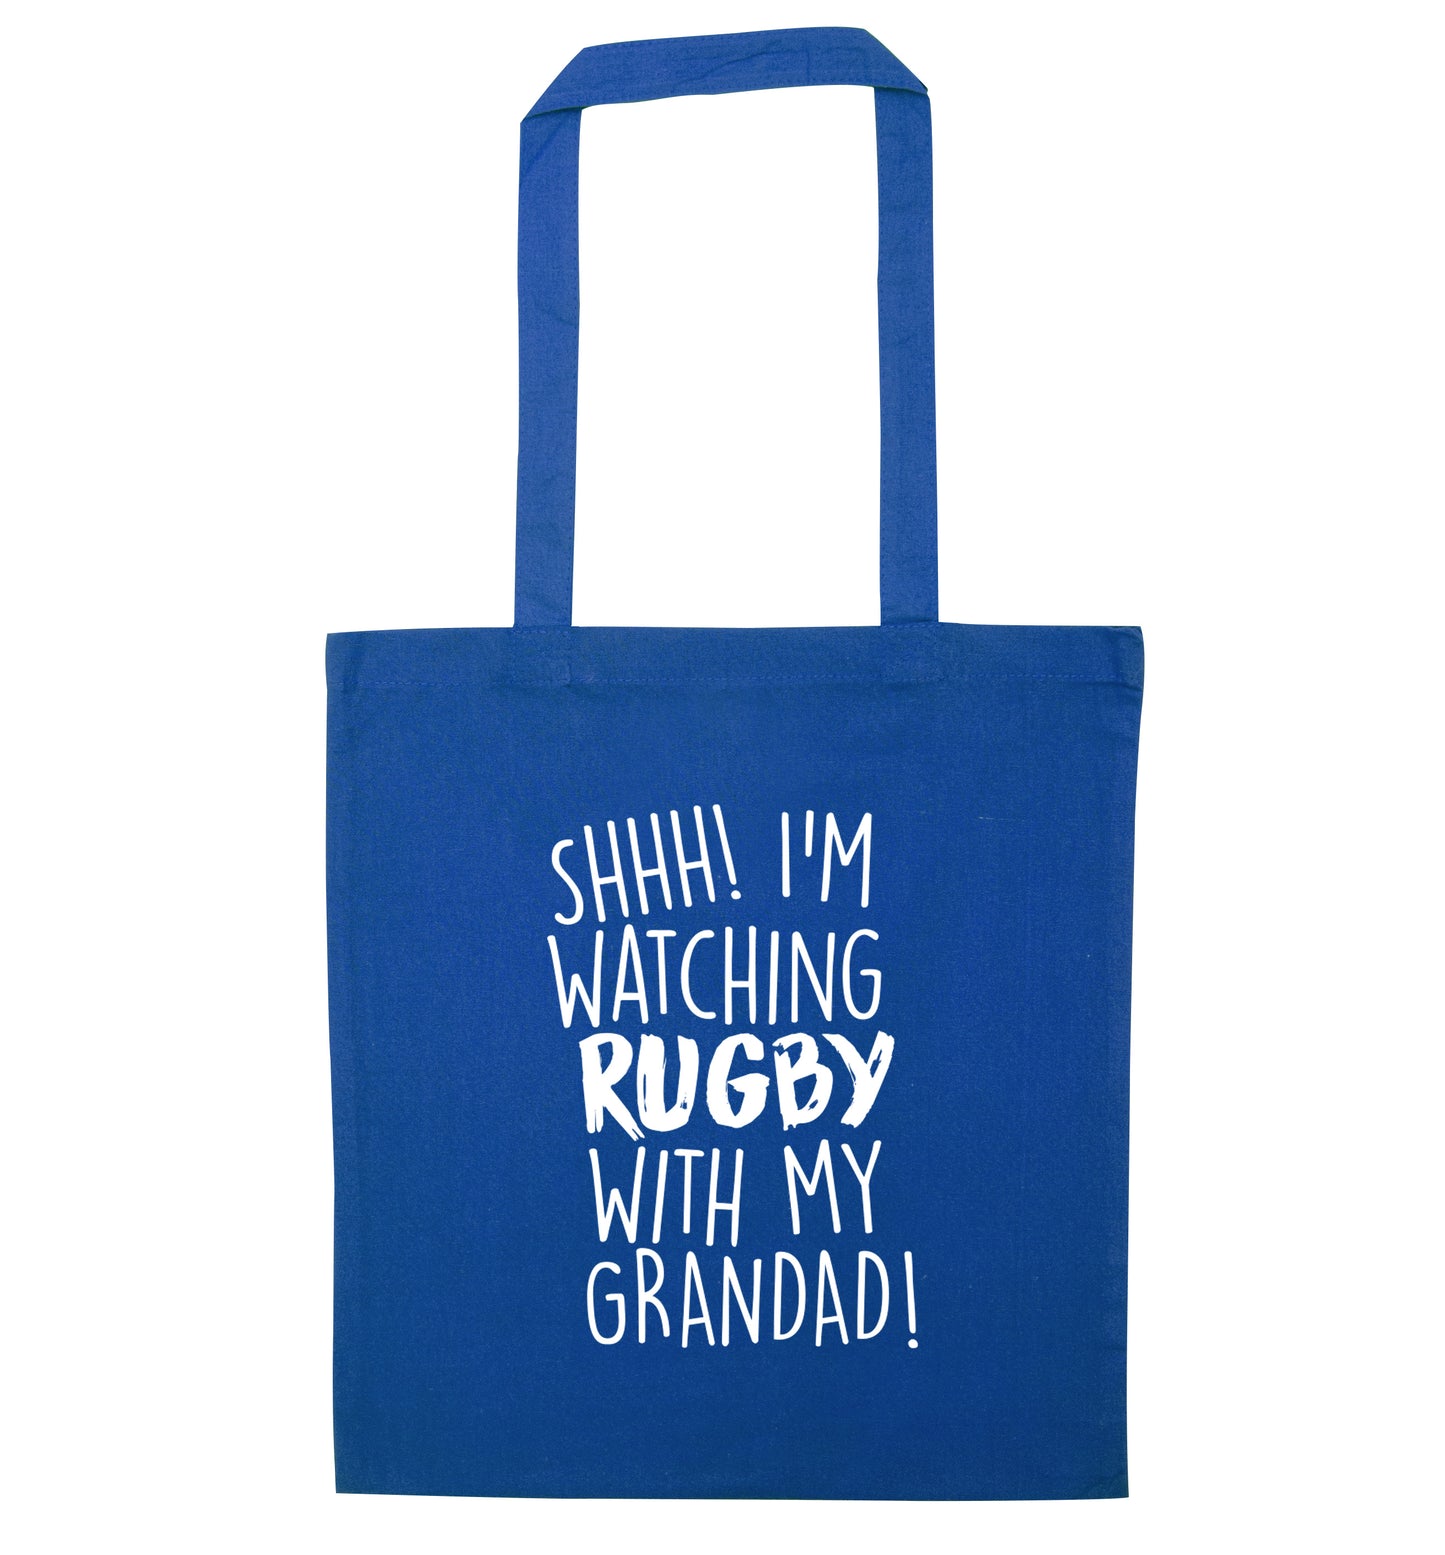 Shh I'm watching rugby with my grandaughter blue tote bag